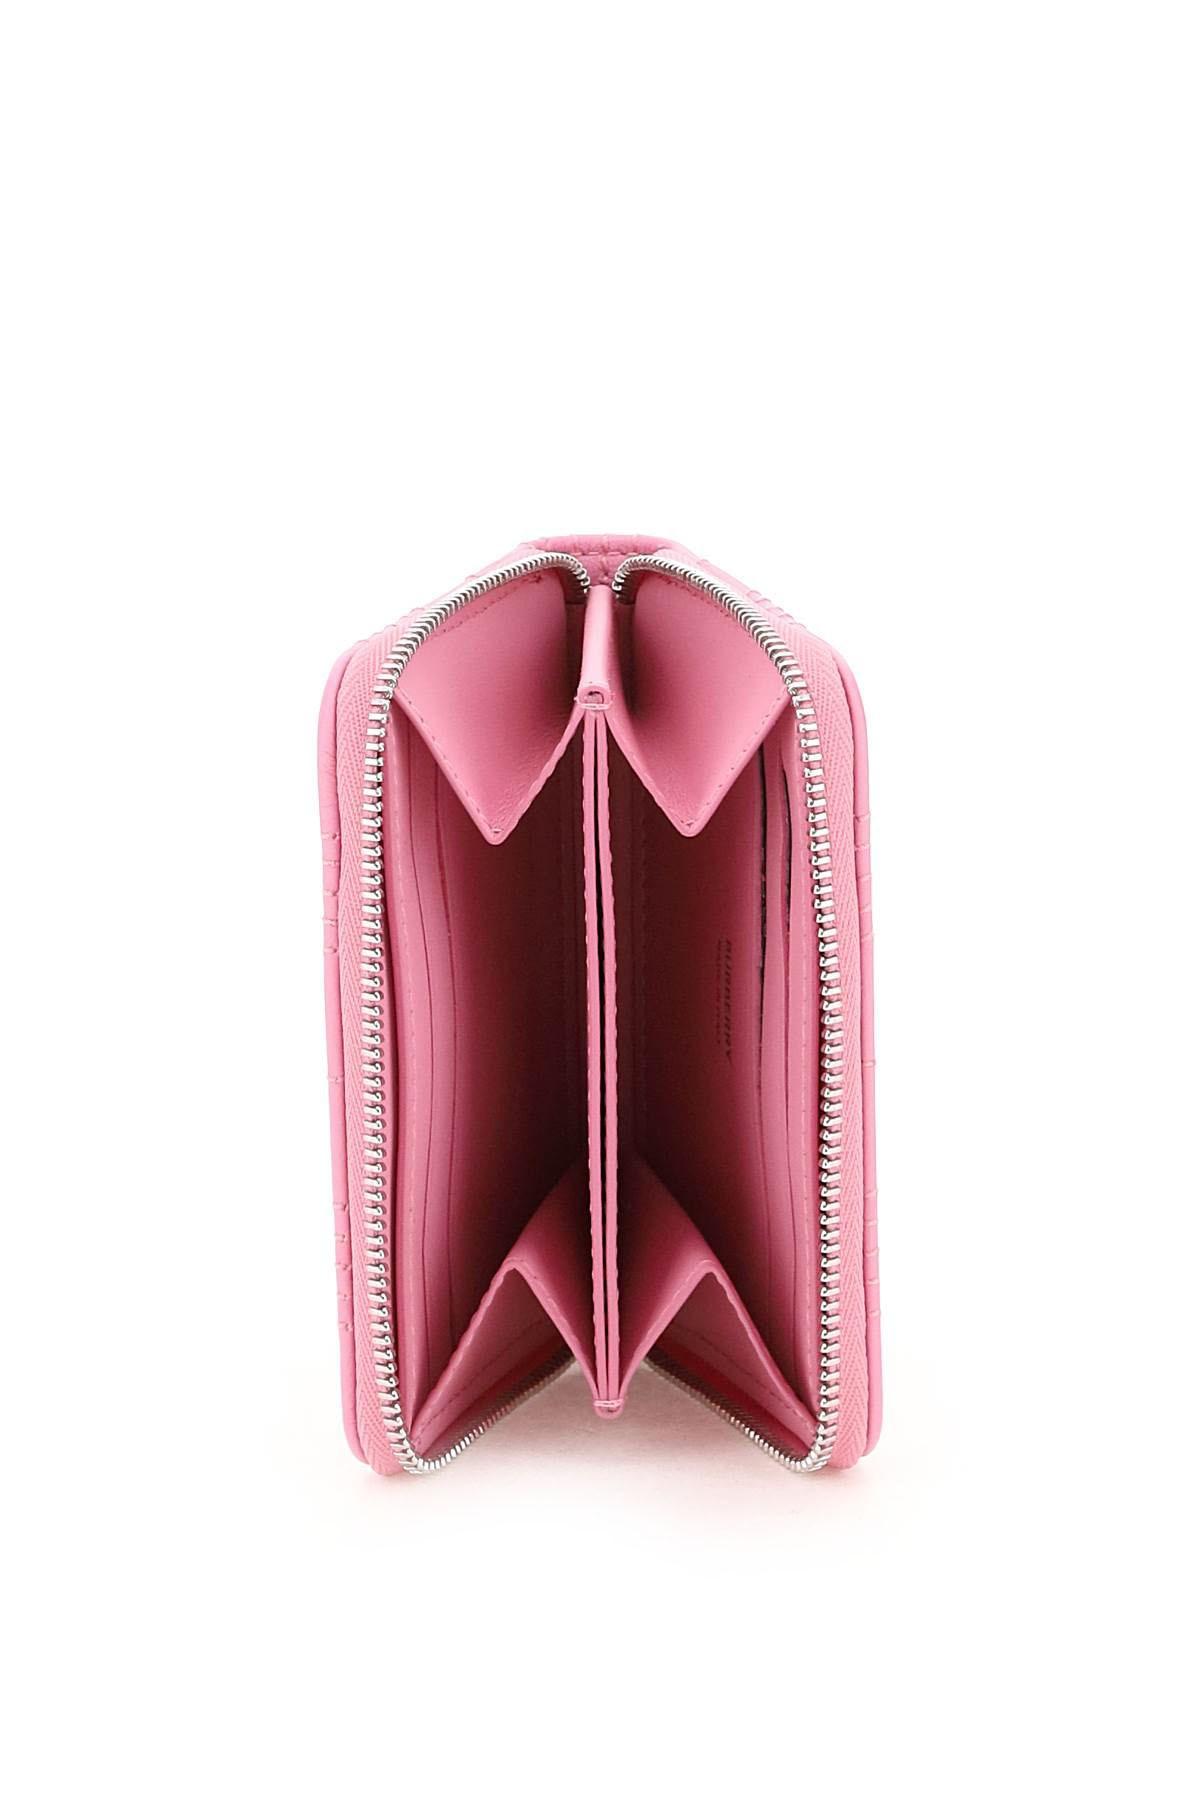 Burberry Quilted Leather Lola Mini Wallet in Pink - Lyst